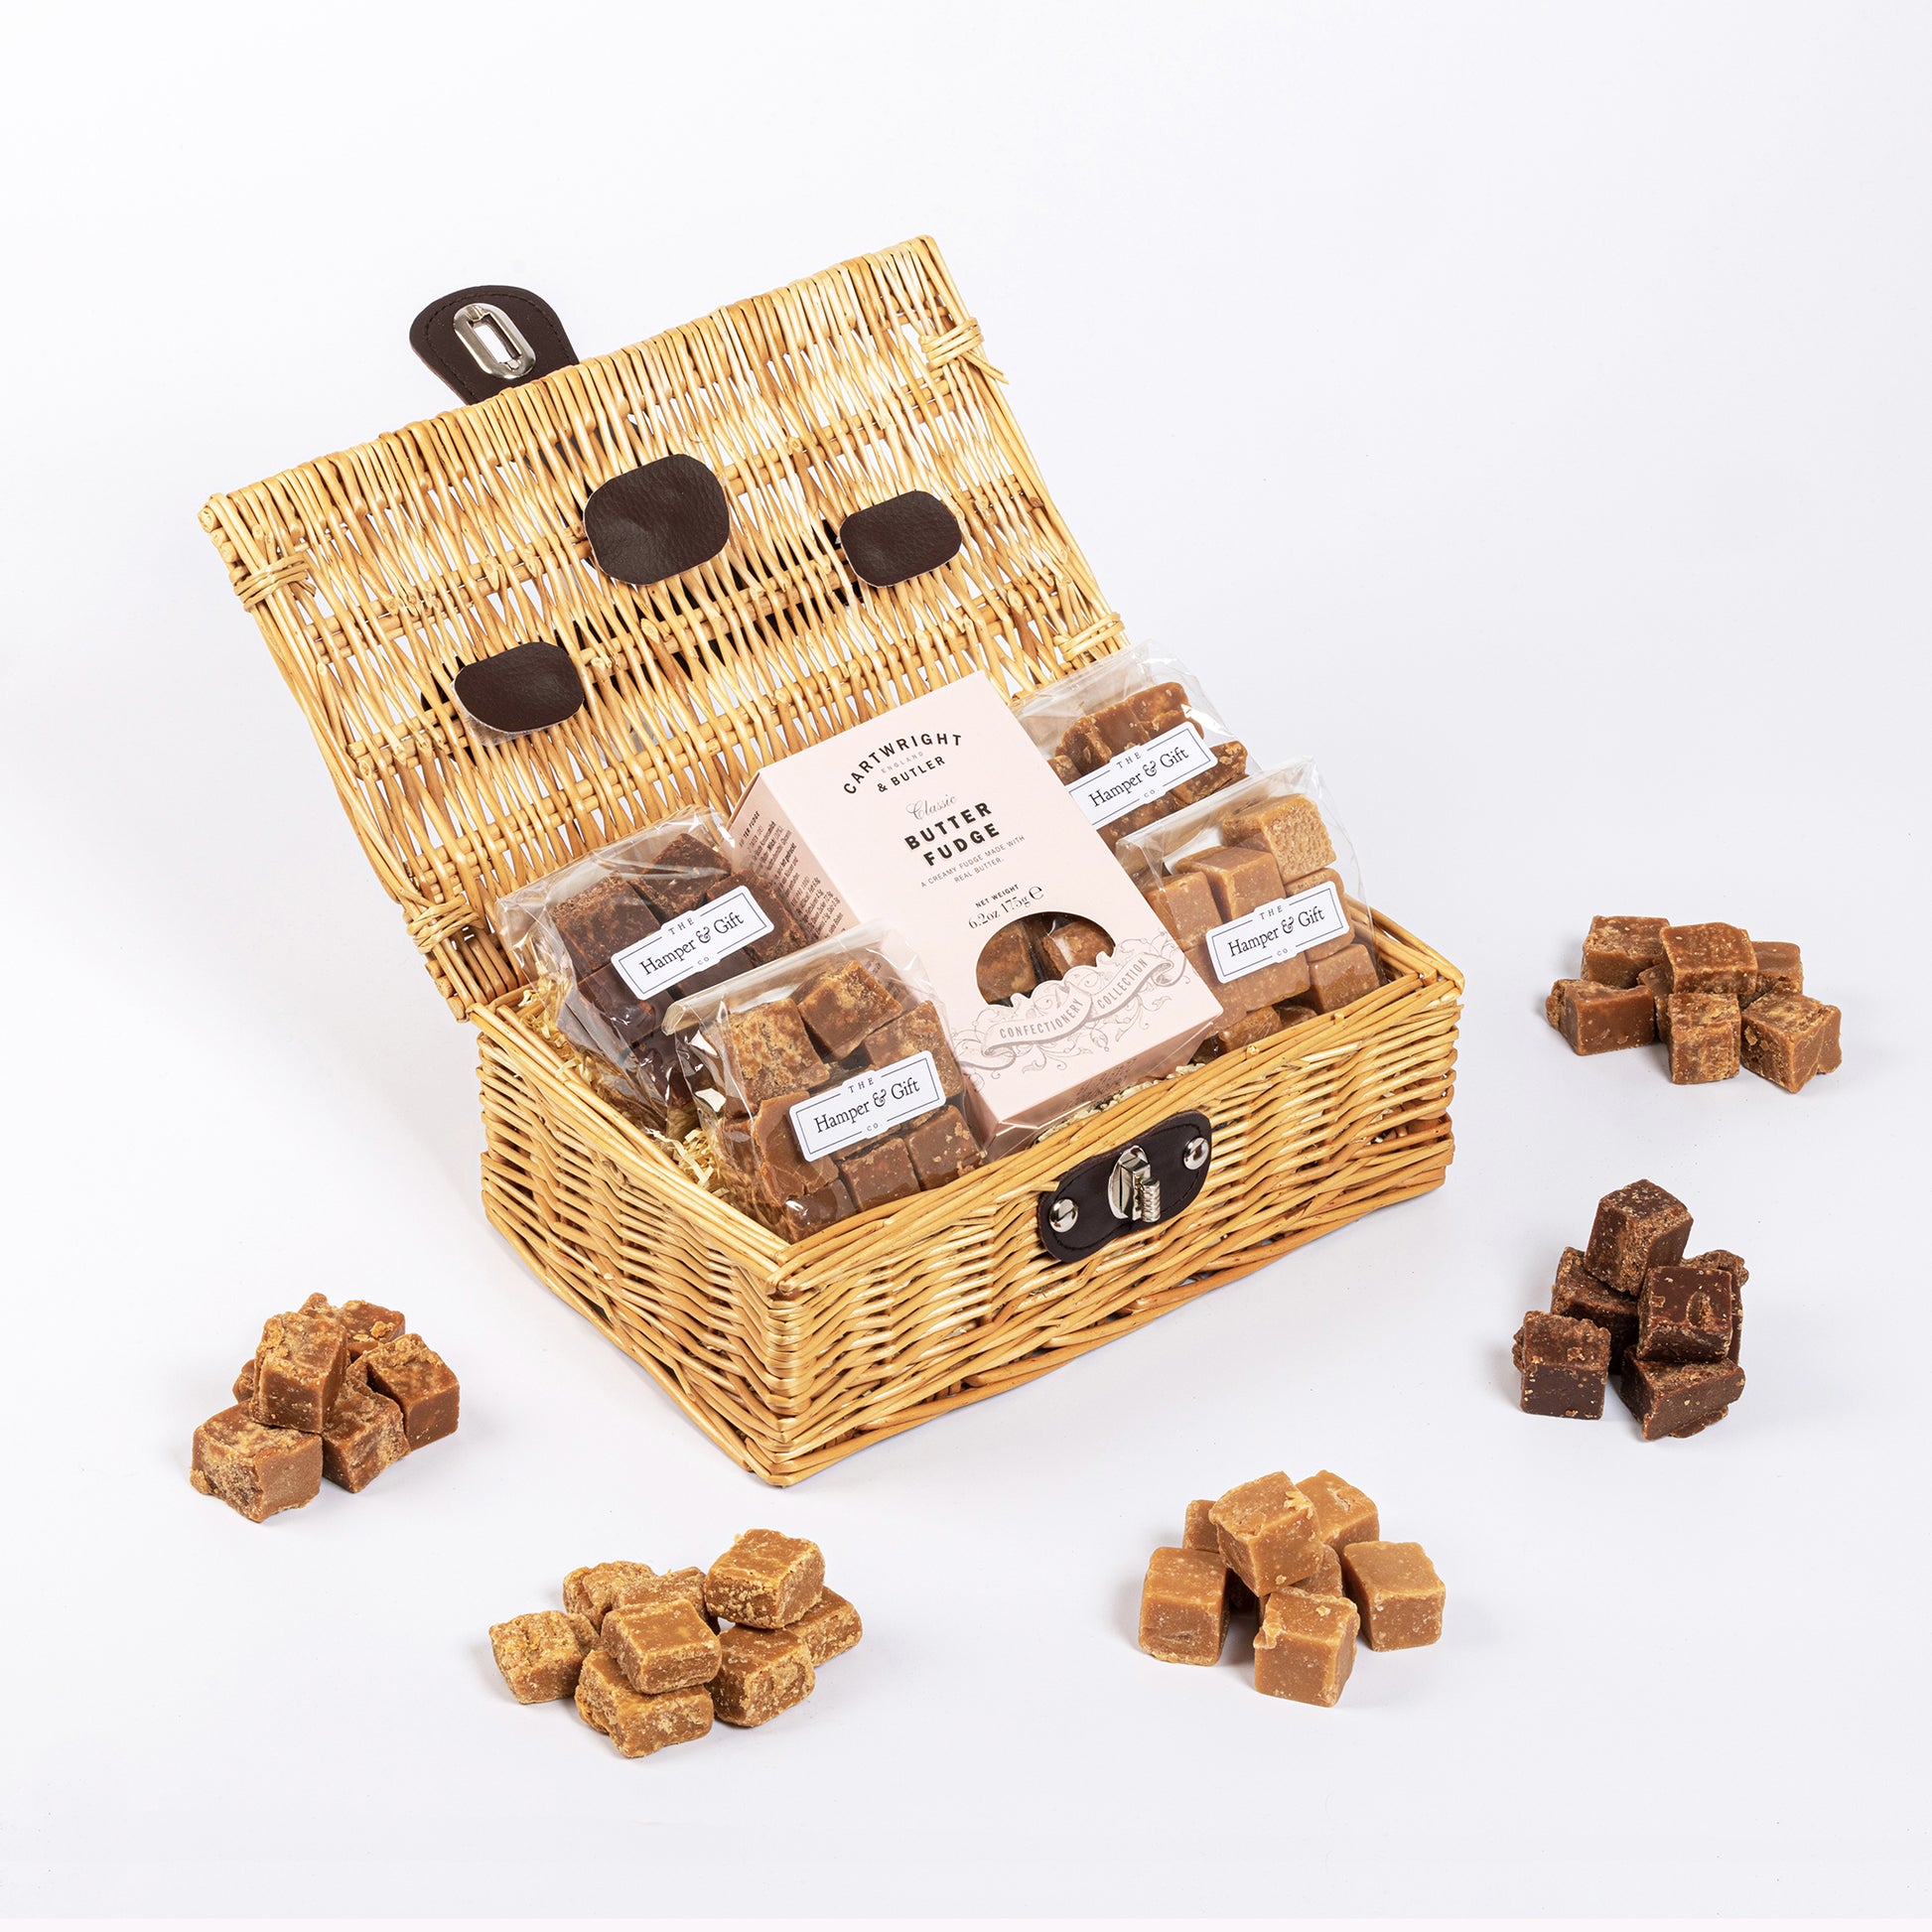 Little Fudge Hamper filled with a variety of gourmet fudge